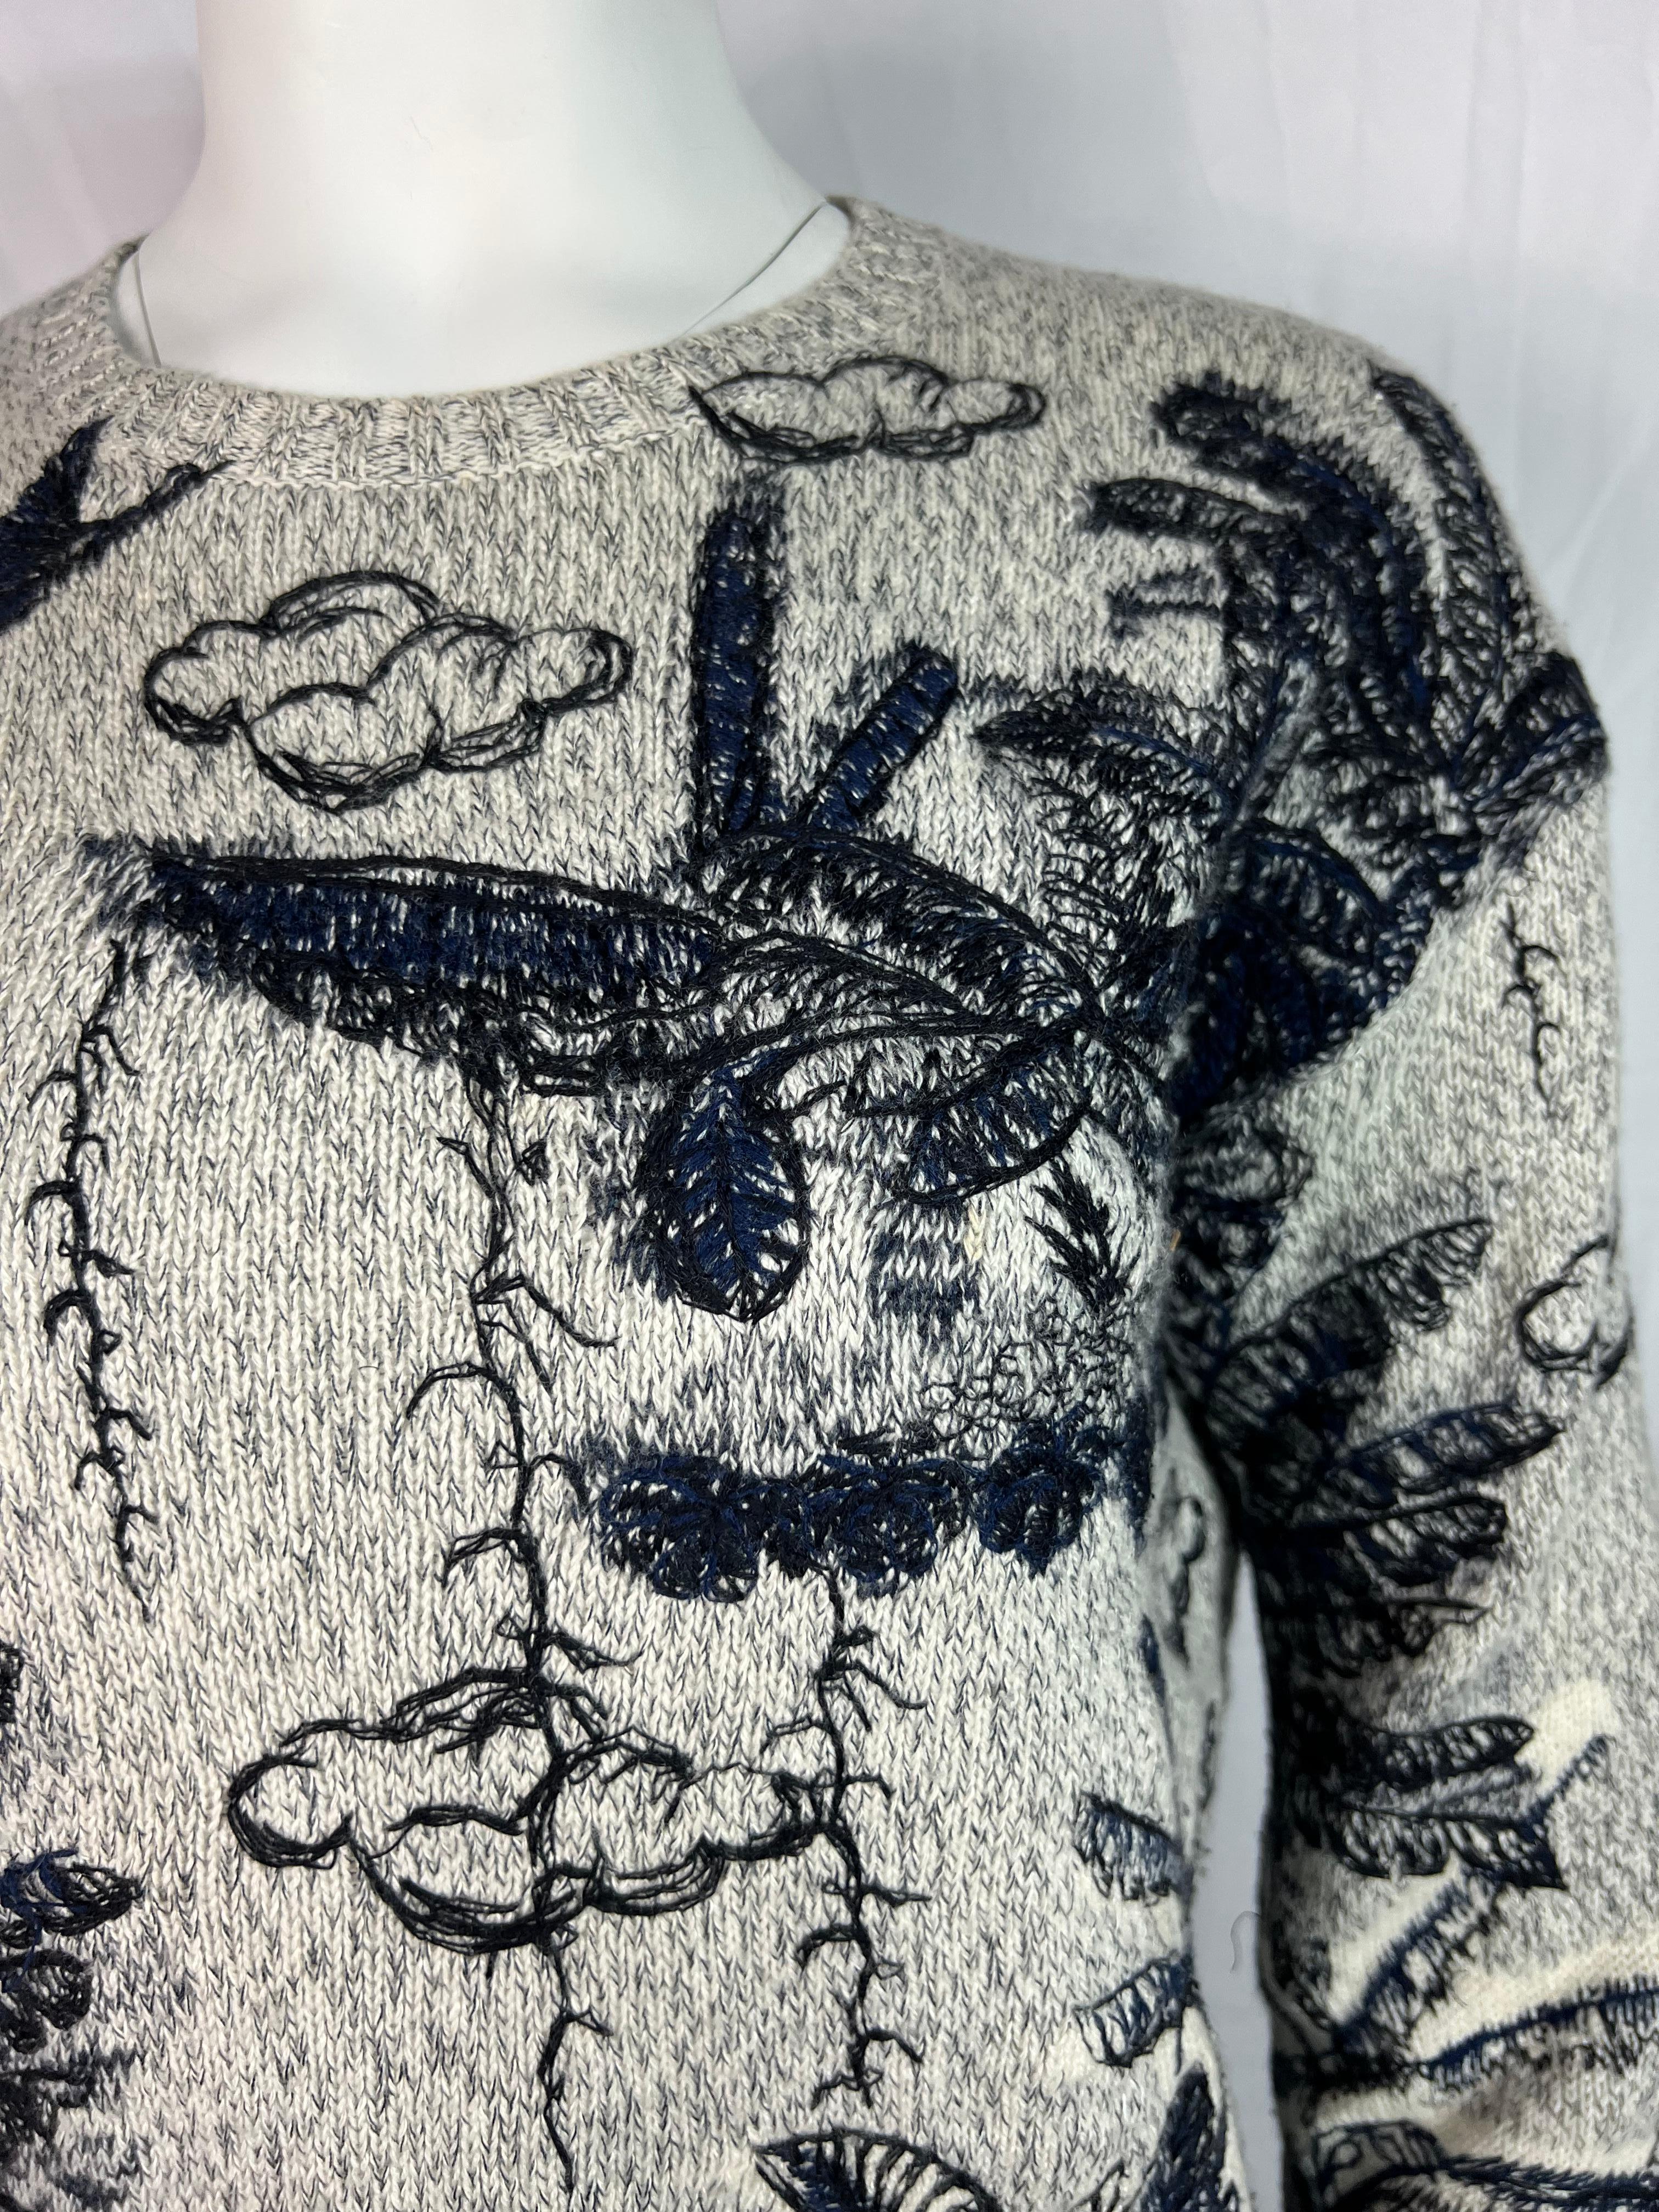 A Christian Dior cashmere sweater, with embroidered design.
​It’s a cozy yet stylish piece with a distinct character and recognizable Dior’s feminine charm.
​Features an amazingly detailed embroidered pattern portraying various flora and fauna